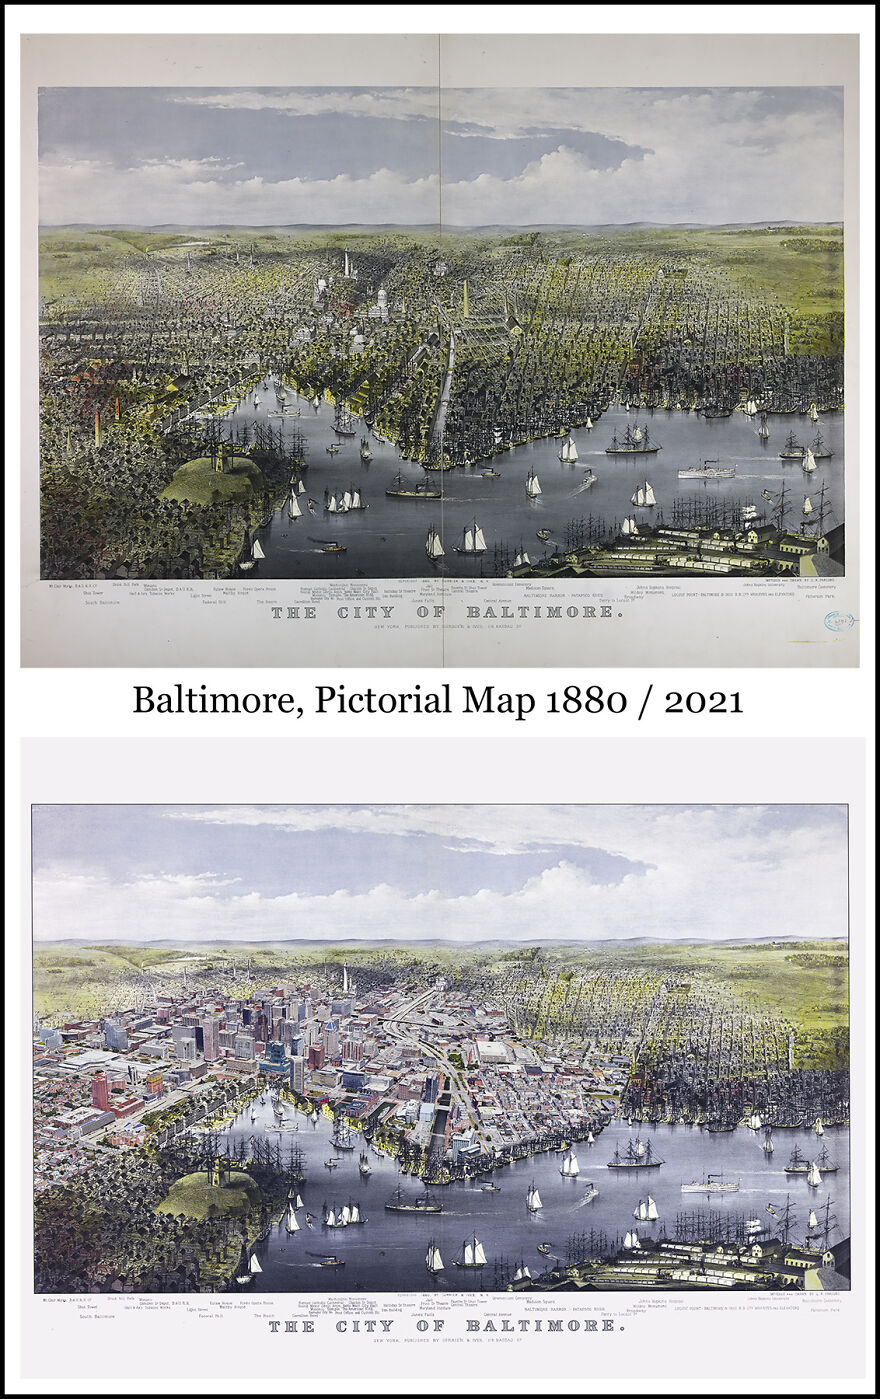 Baltimore, Pictorial Map 1880 / 2021